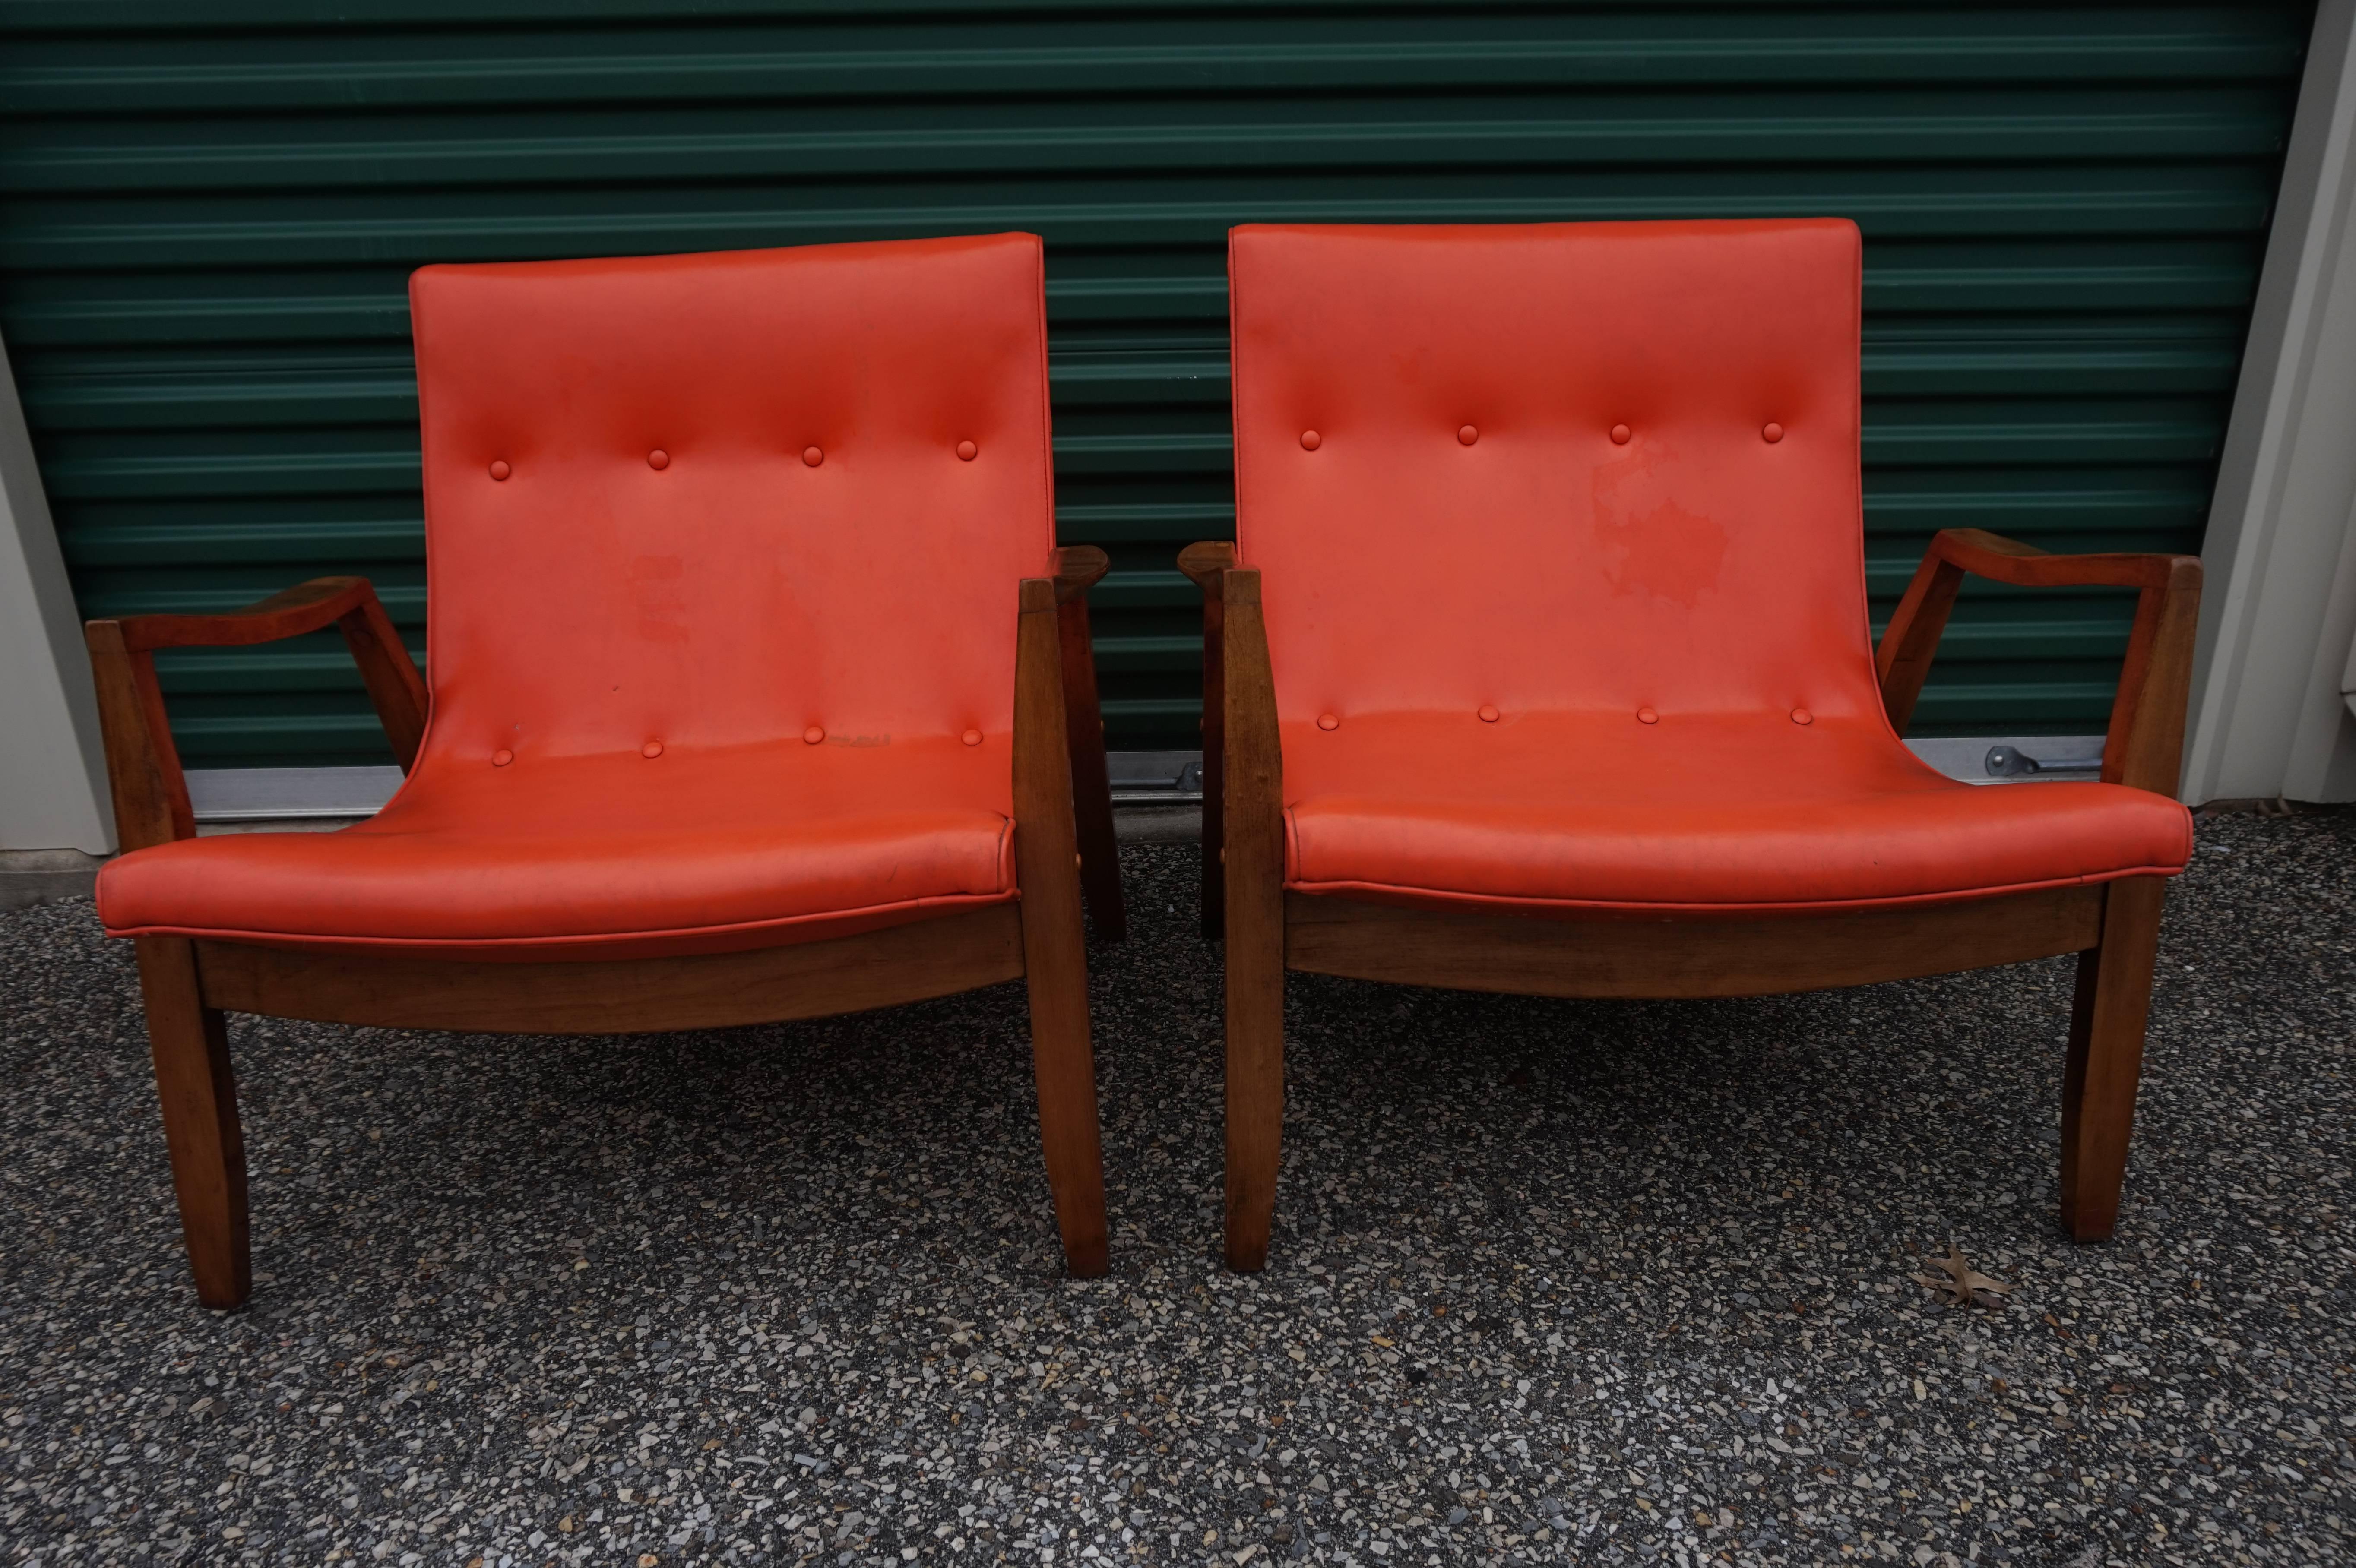 Early pair of Milo Baughman signed scoop lounge chairs with light walnut frames. Original orange vinyl shows wear-re-upholstery is recommended. James inc. tag on underside of one.